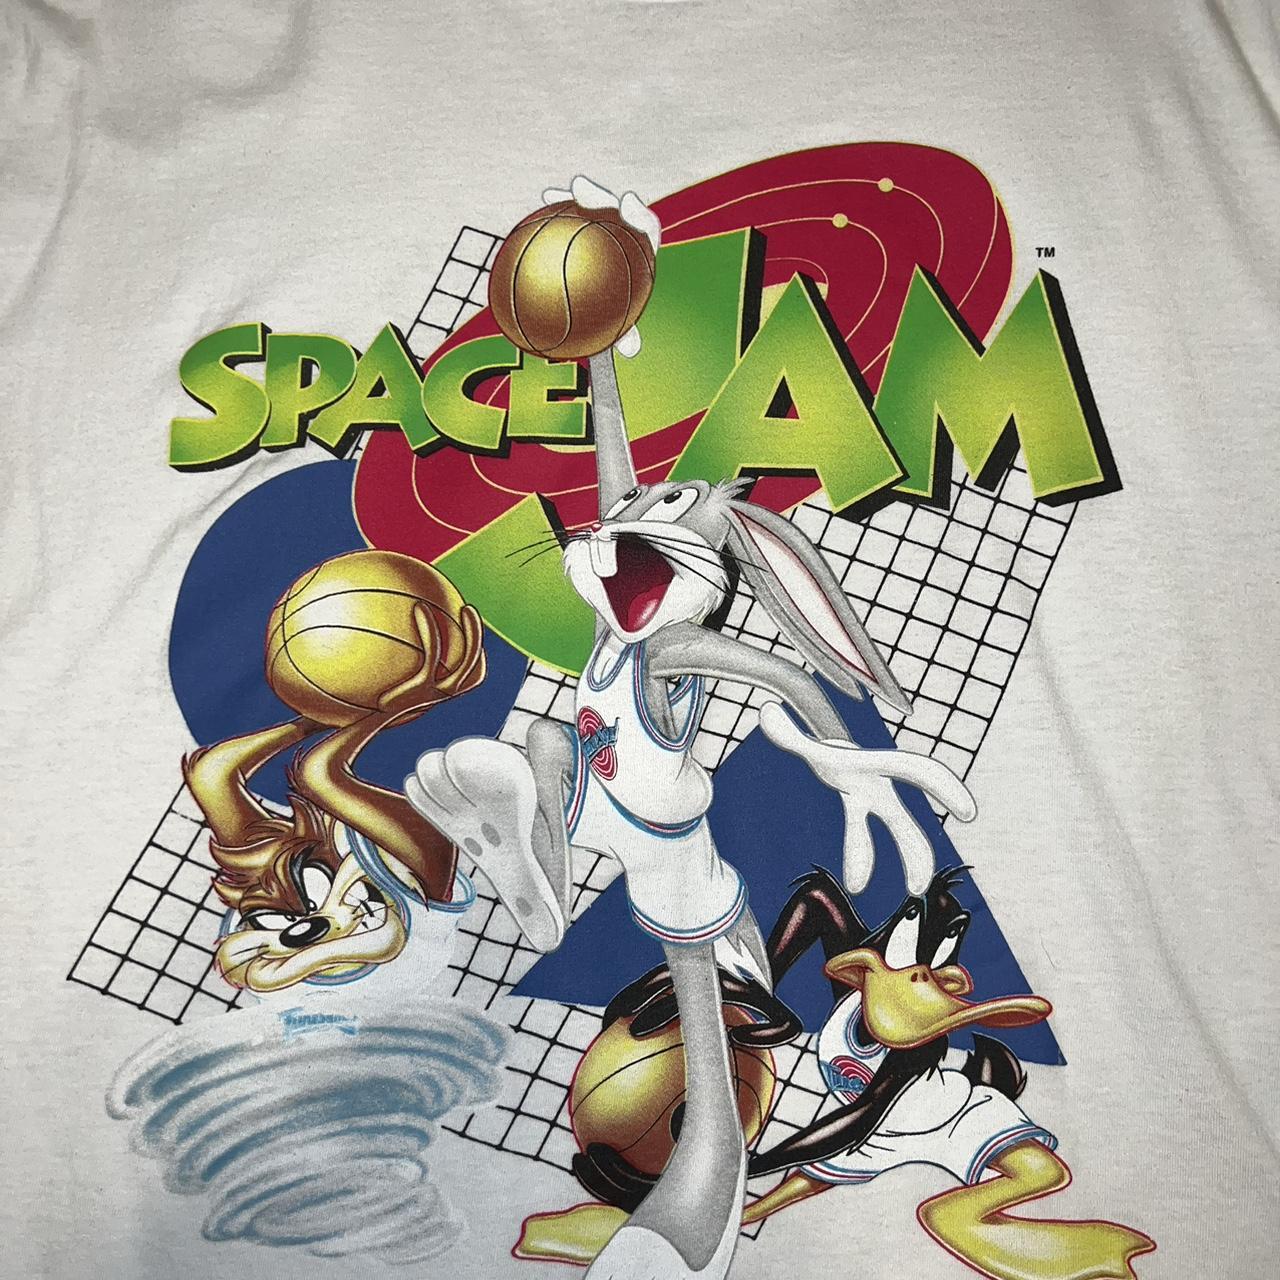 Space Jam tee XL amazing condition msg me for... - Depop